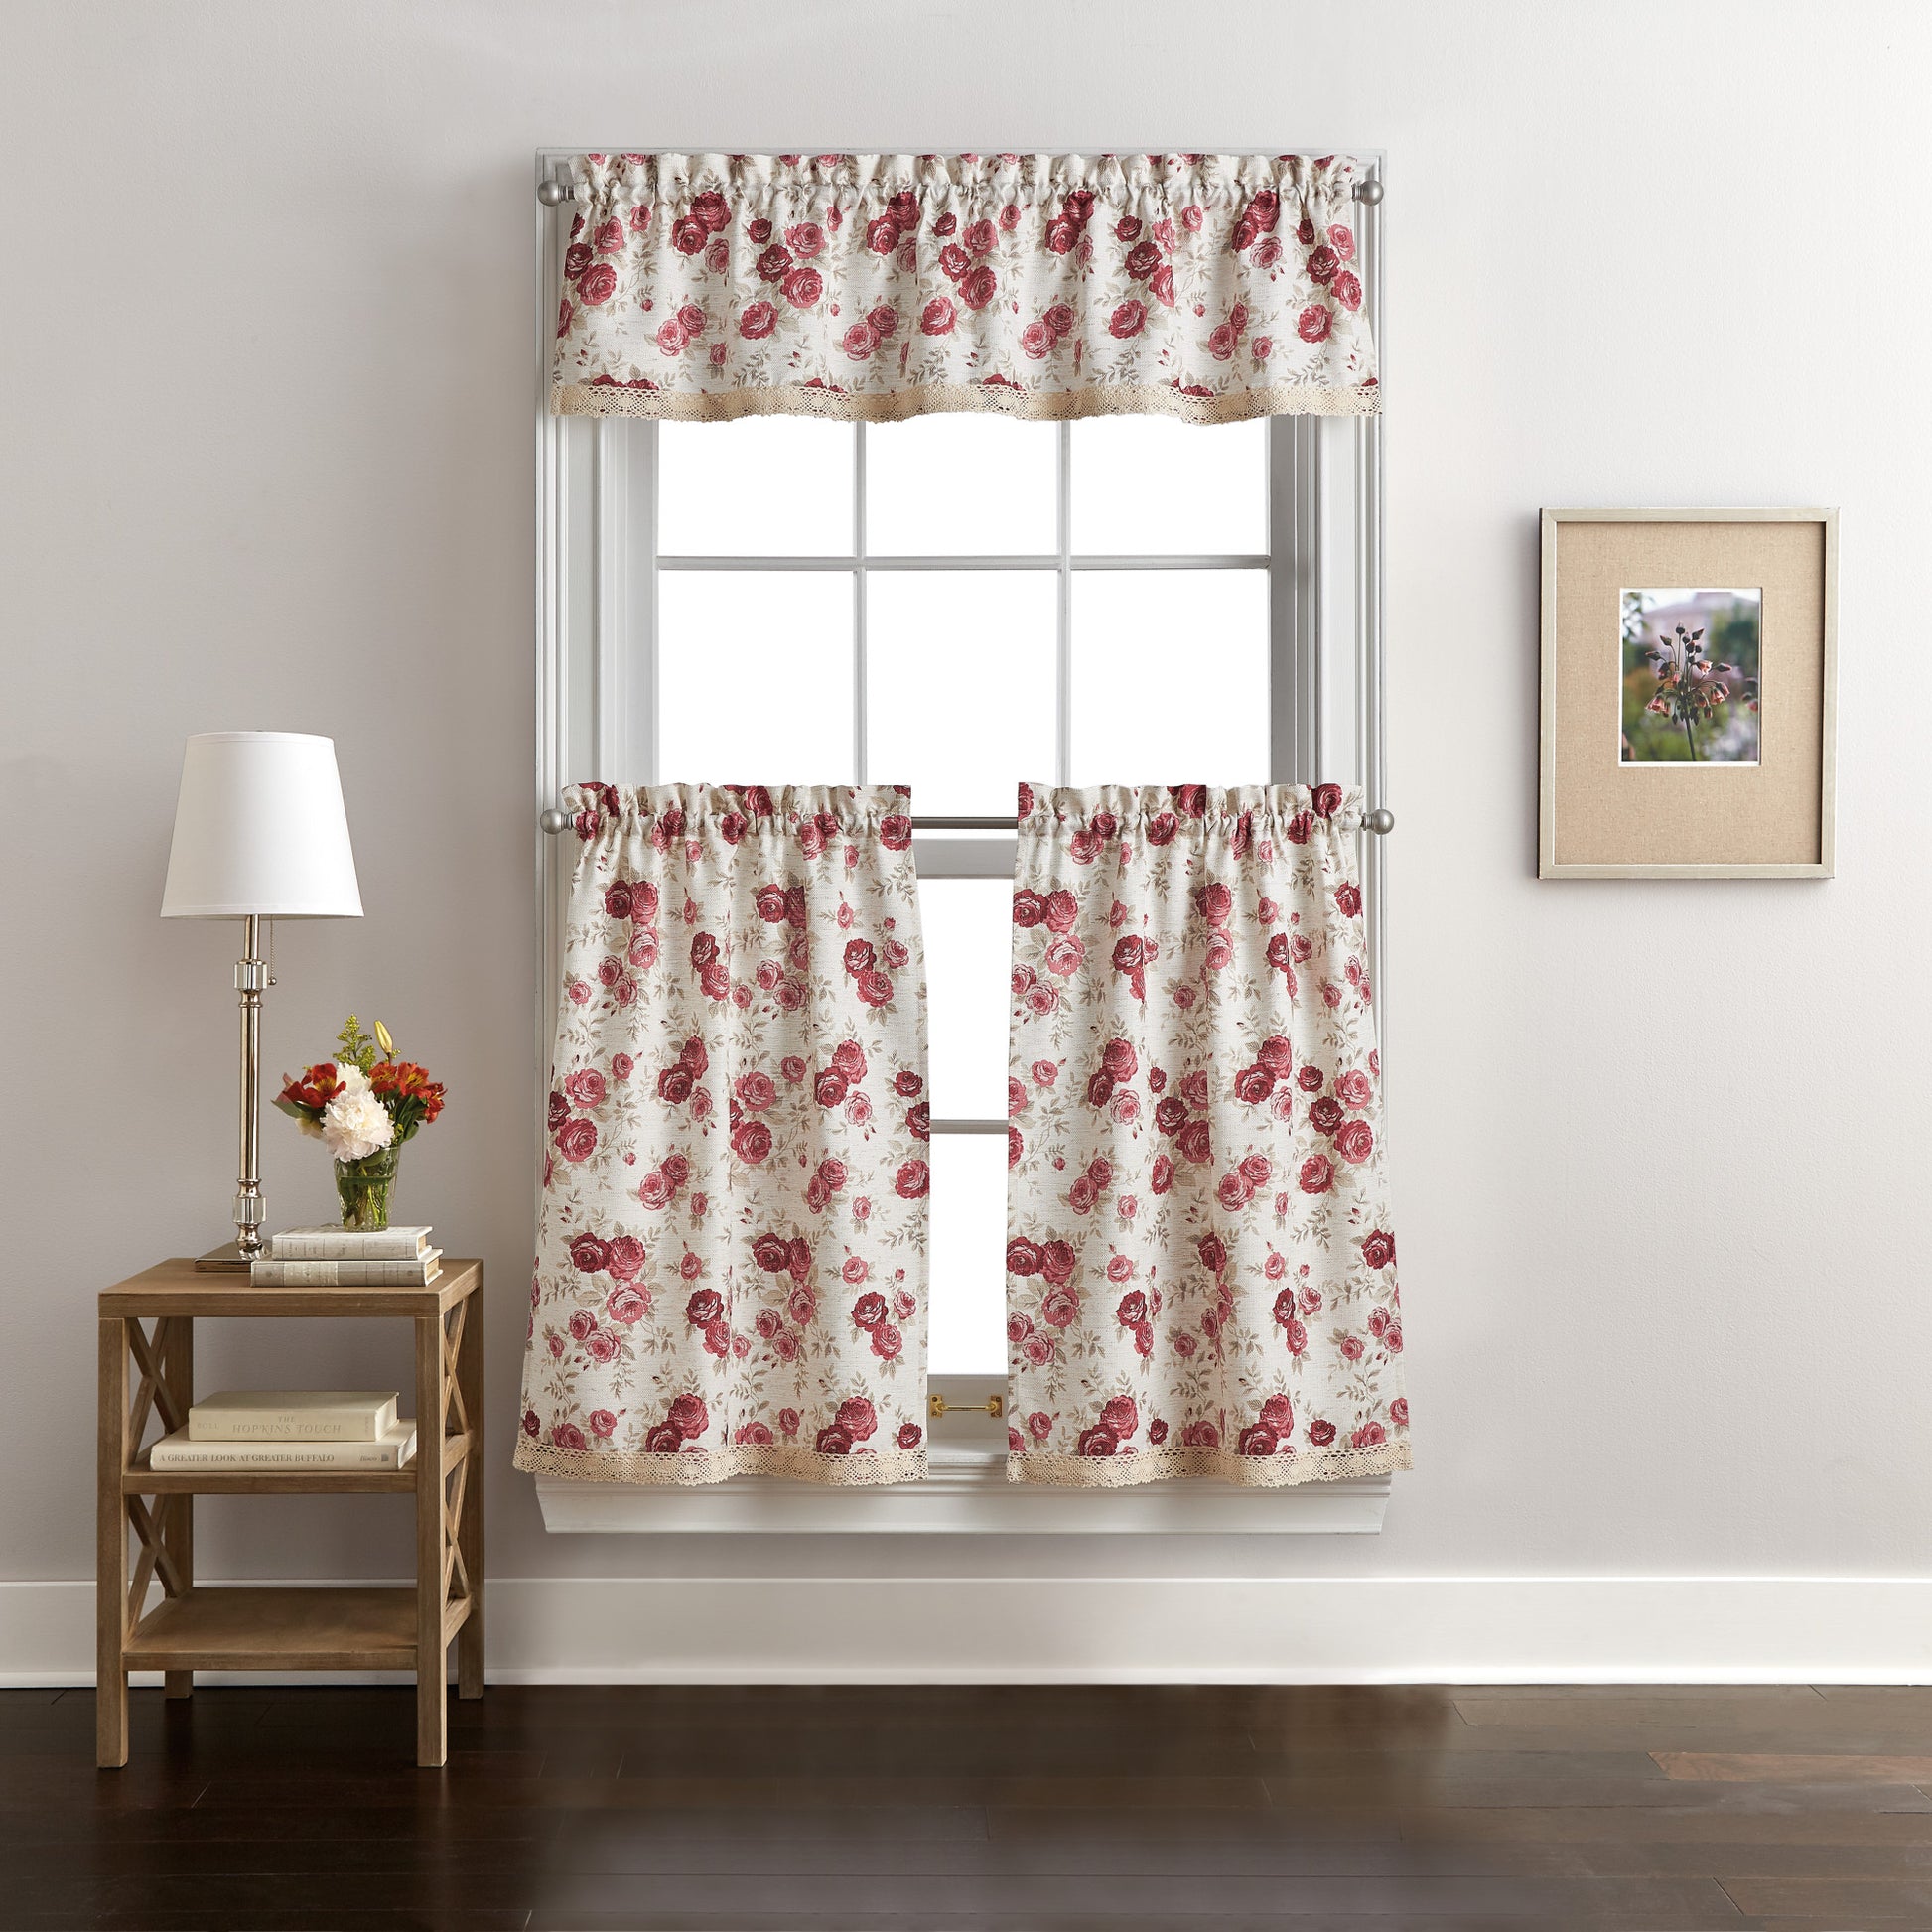 Curtainworks Antique Rose Valance and Tiers